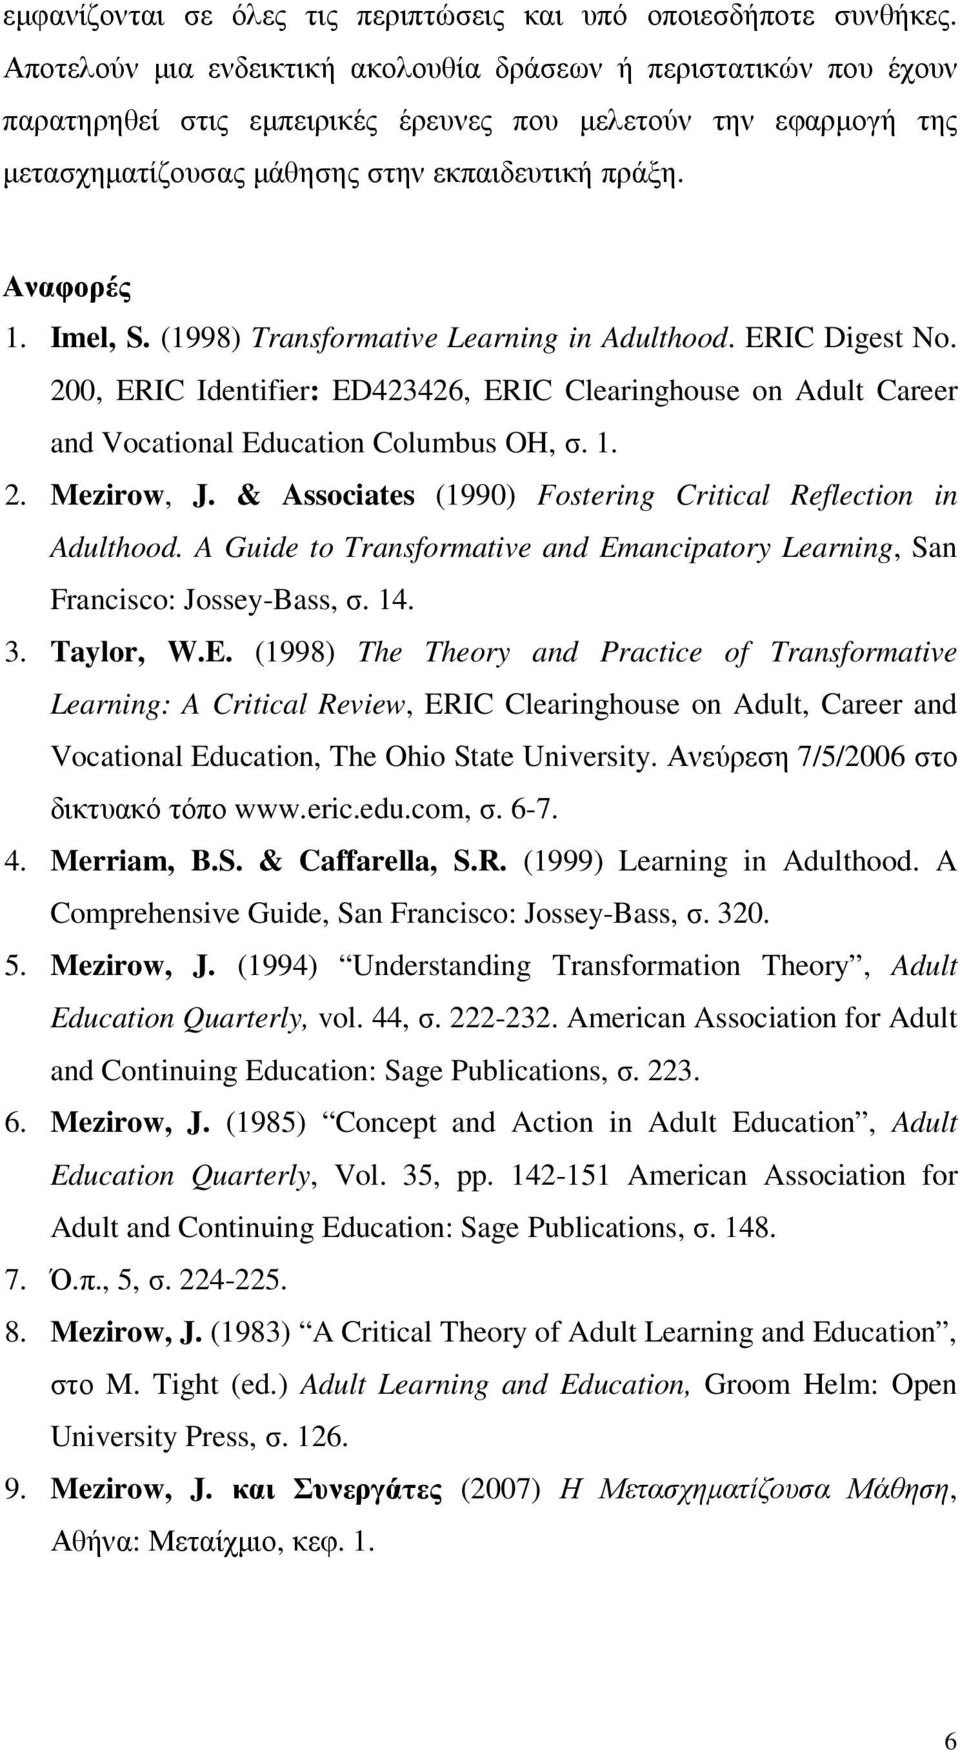 Imel, S. (1998) Transformative Learning in Adulthood. ERIC Digest No. 200, ERIC Identifier: ED423426, ERIC Clearinghouse on Adult Career and Vocational Education Columbus OH, σ. 1. 2. Mezirow, J.